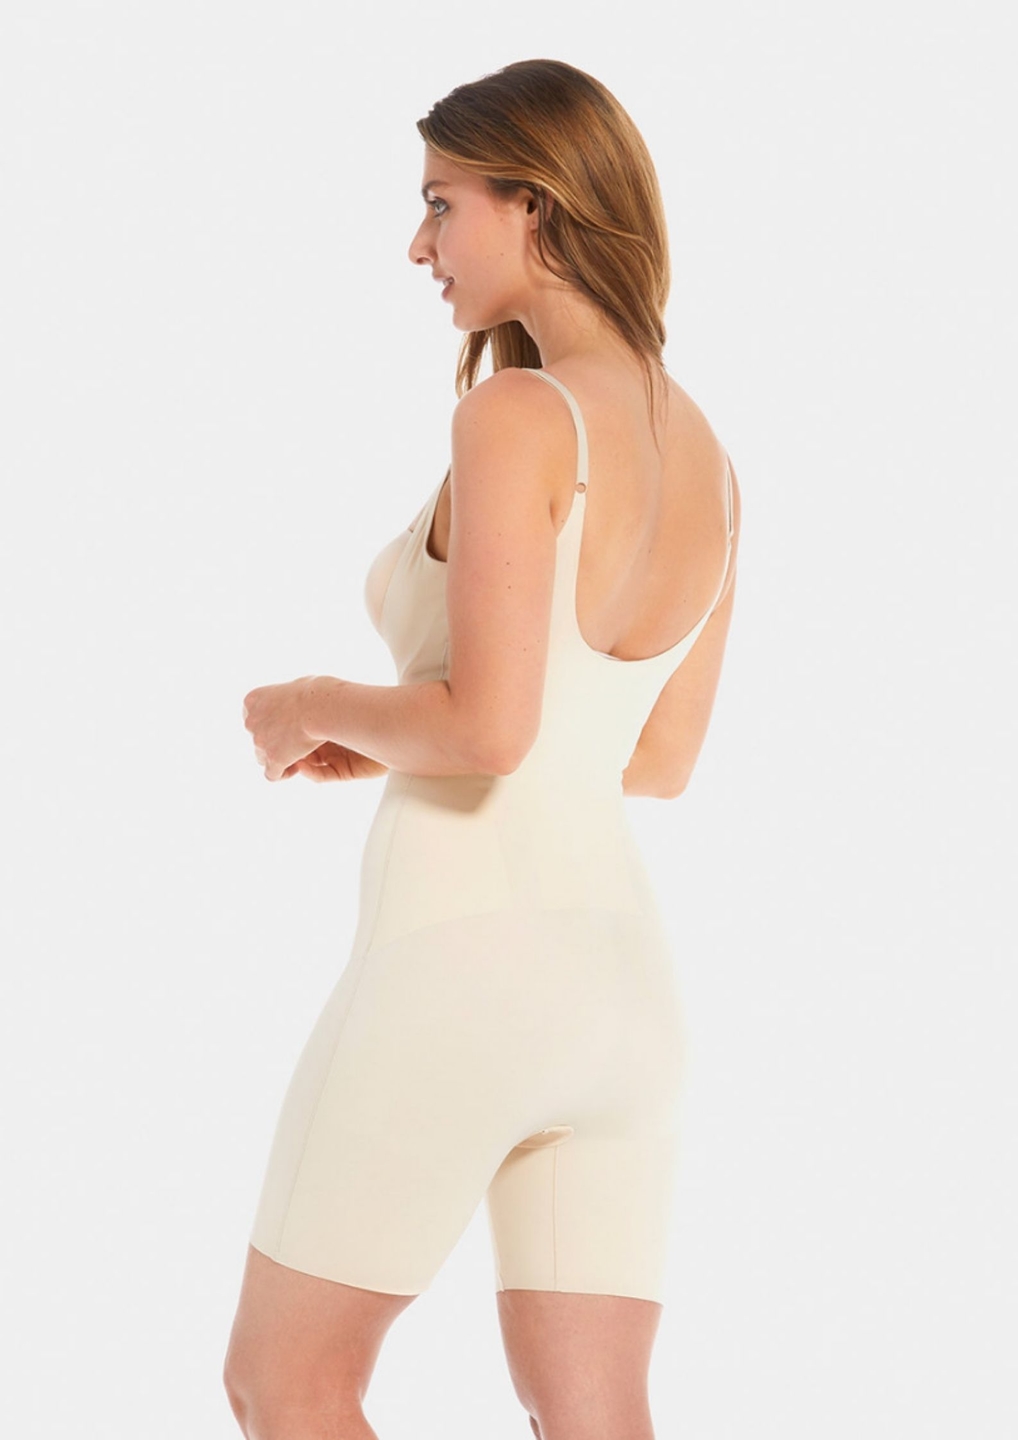 Answering your questions about Shapewear